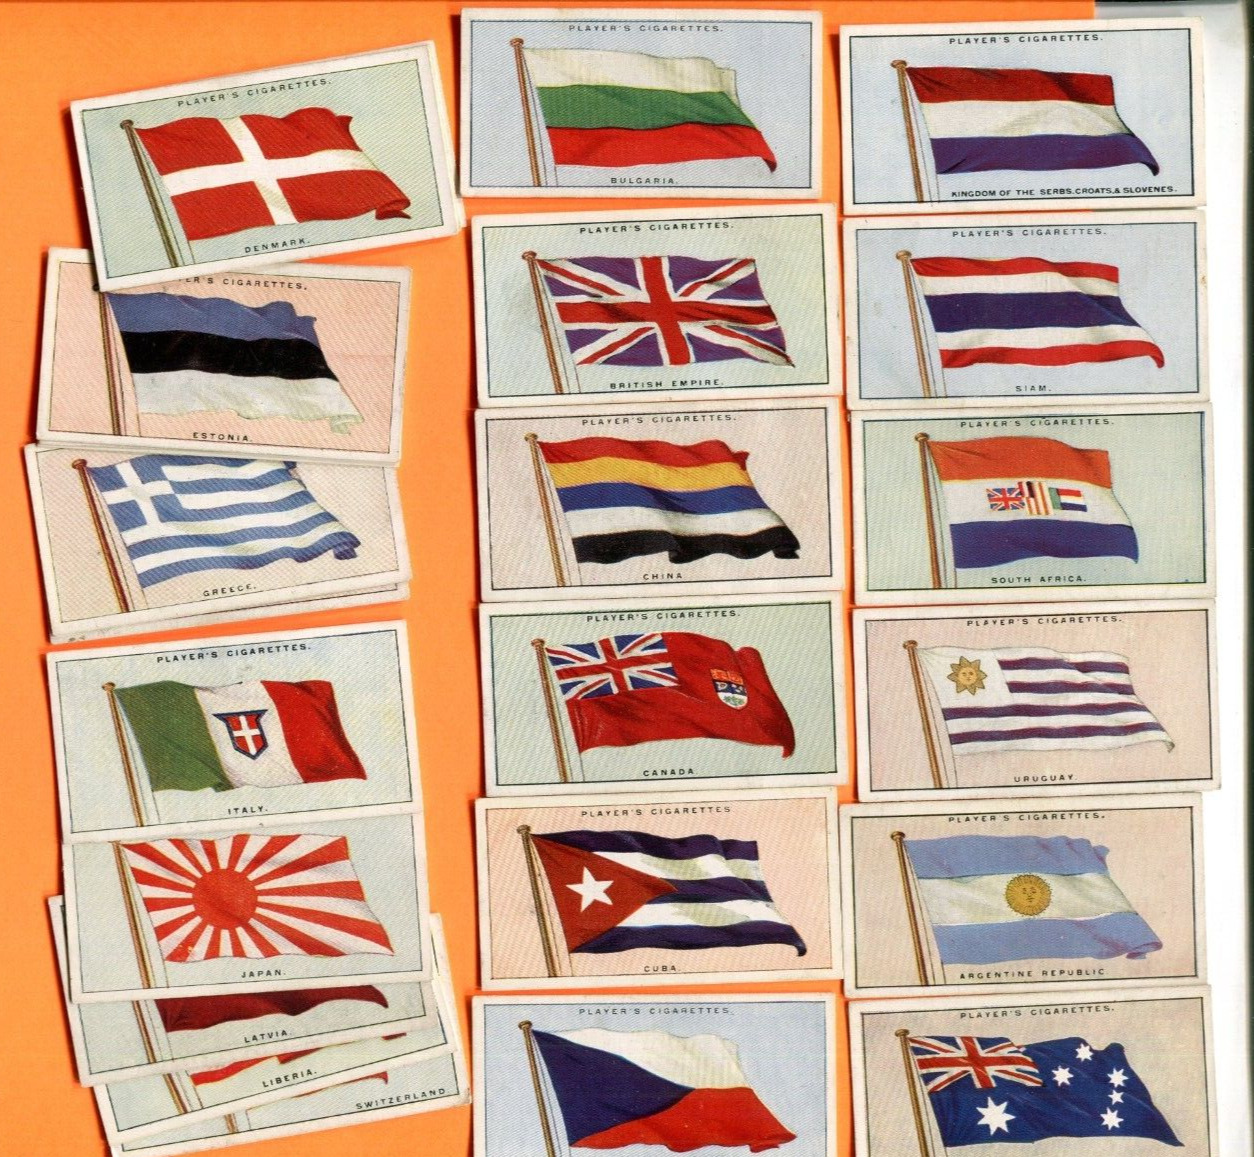 1928 JOHN PLAYER & SONS CIGARETTES FLAGS OF THE LEAGUE OF NATIONS 25 CARD LOT